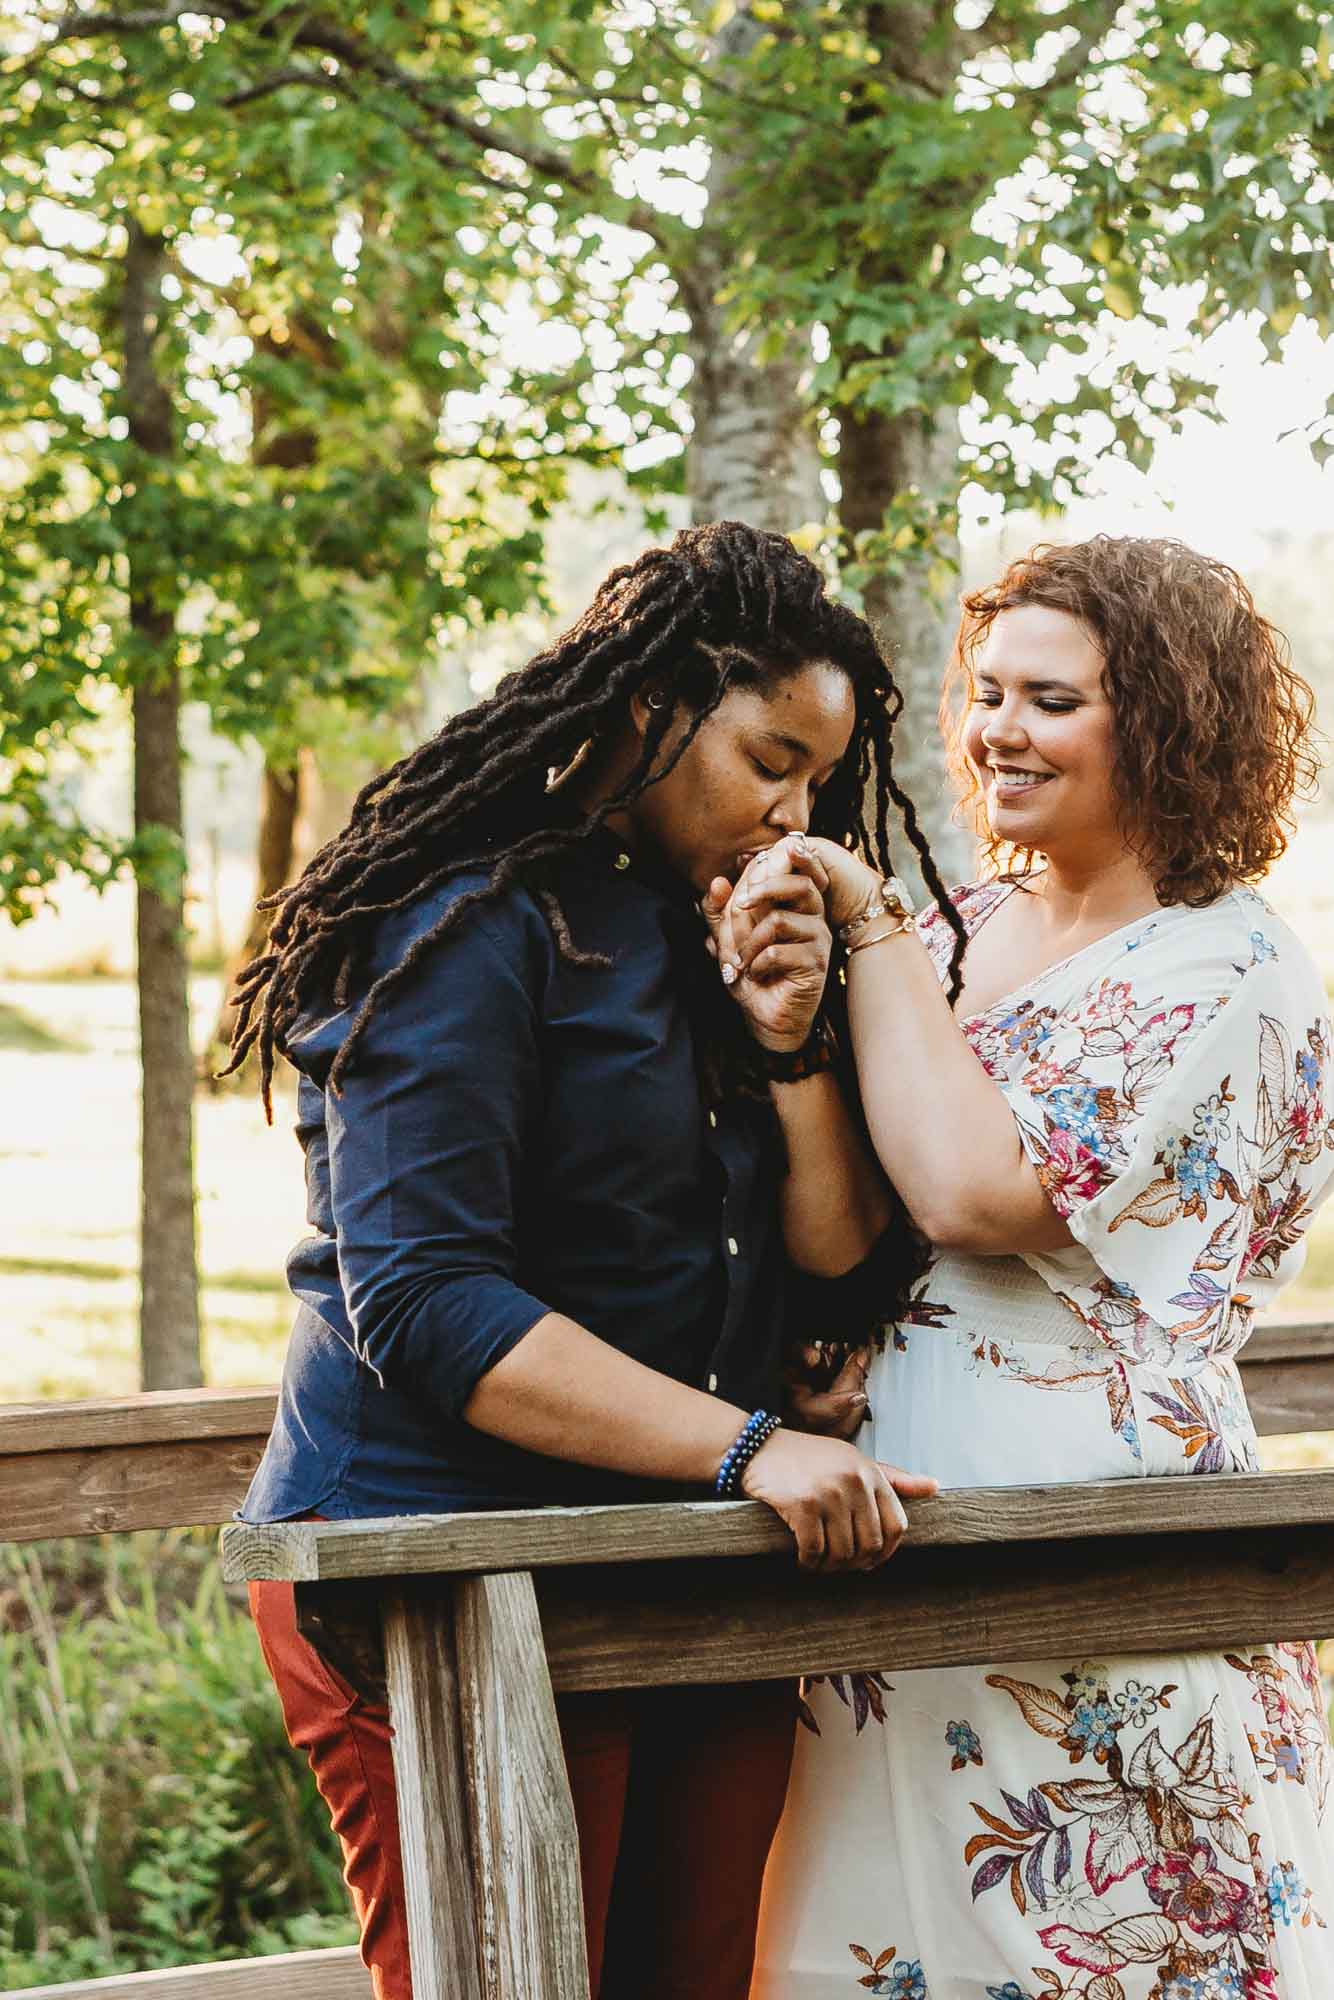 Sunny engagement session at a Georgia farm | Michelle Lacson Photography | Featured on Equally Wed, the leading LGBTQ+ wedding magazine 